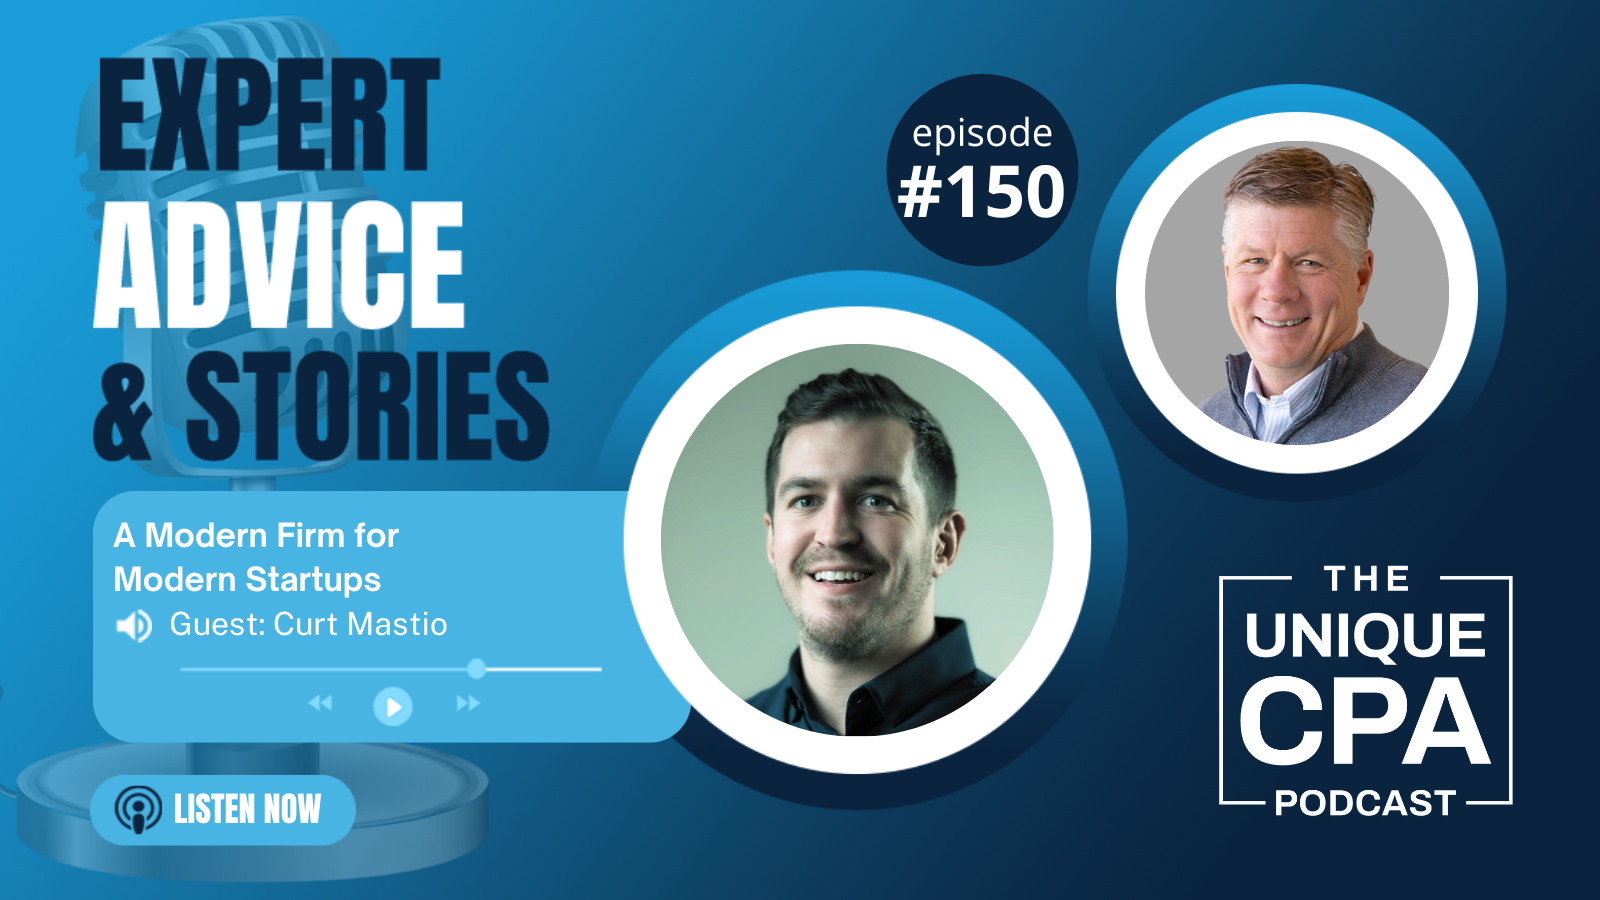 Unique Cpa Featured Image Ep 150 Curt Mastio - A Modern Firm For Modern Startups - Tri-Merit